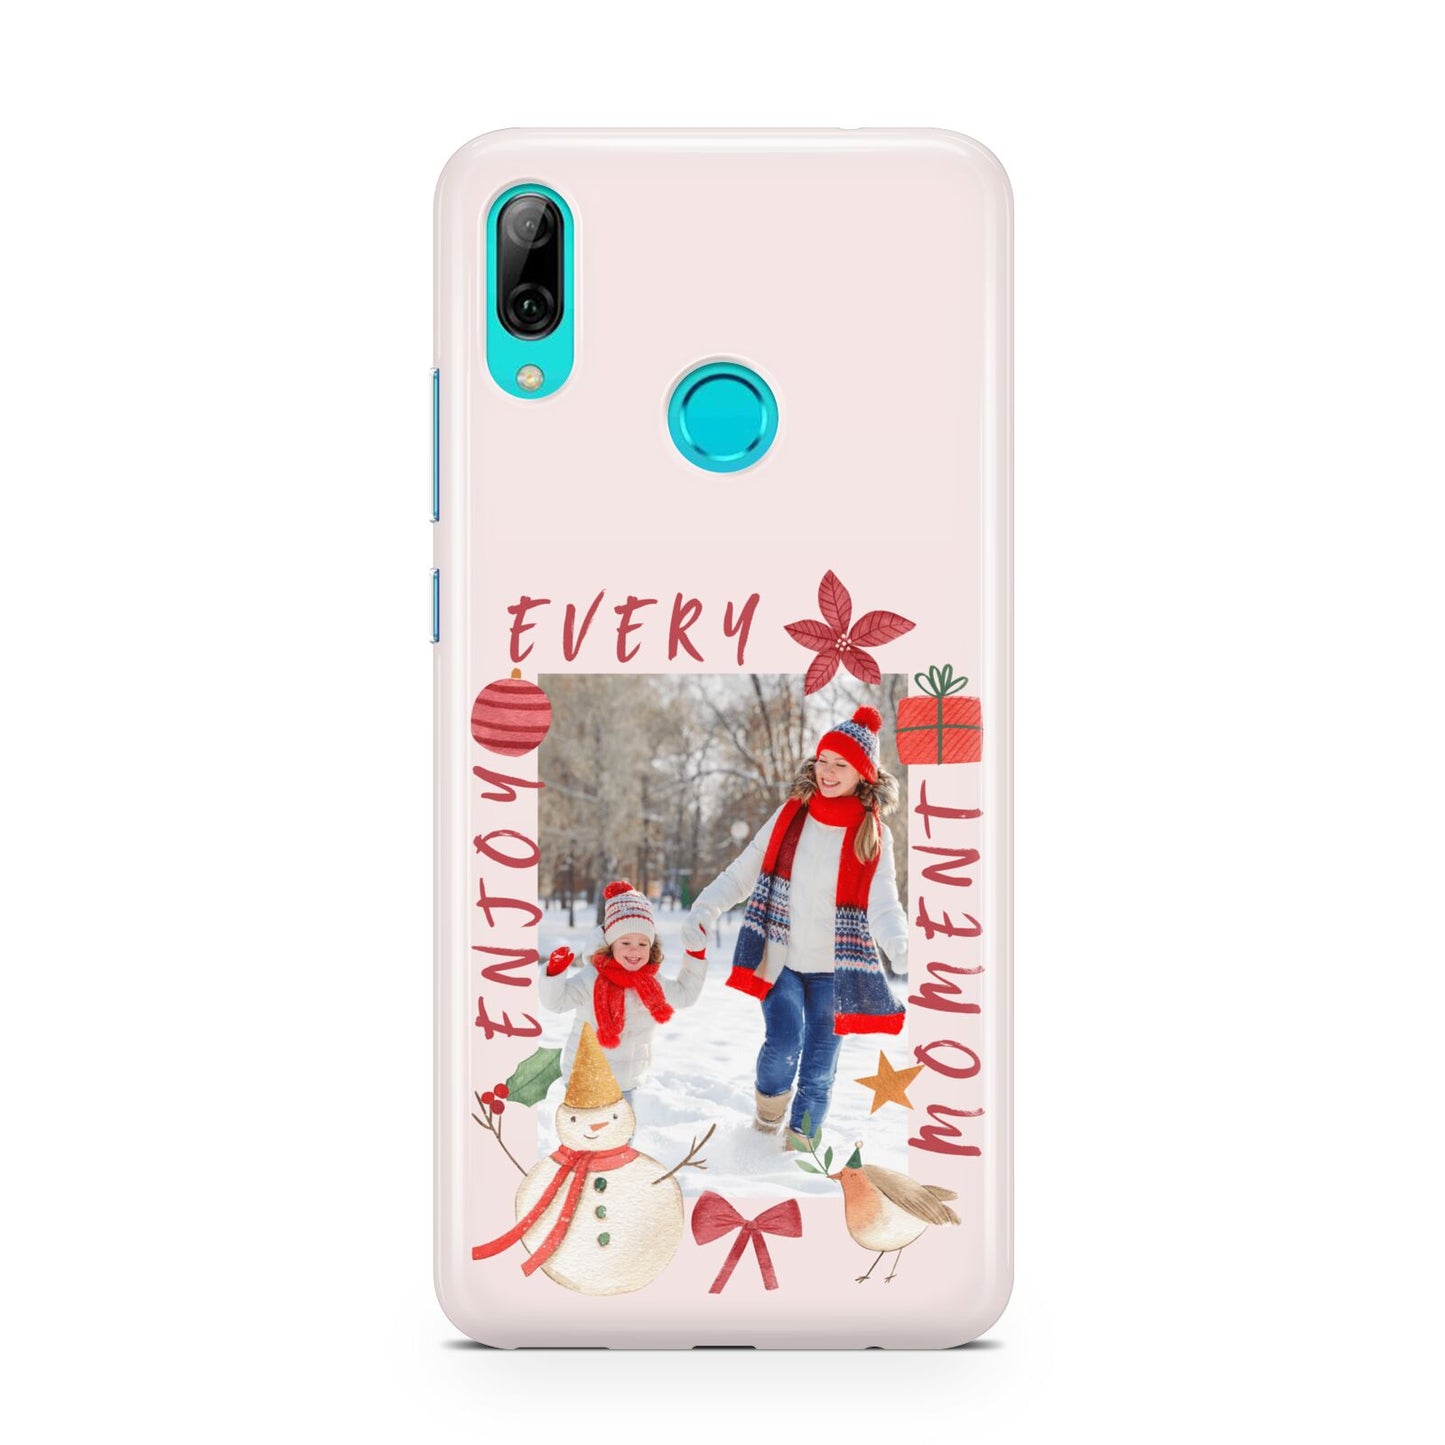 Personalised Christmas Moments Huawei P Smart 2019 Case